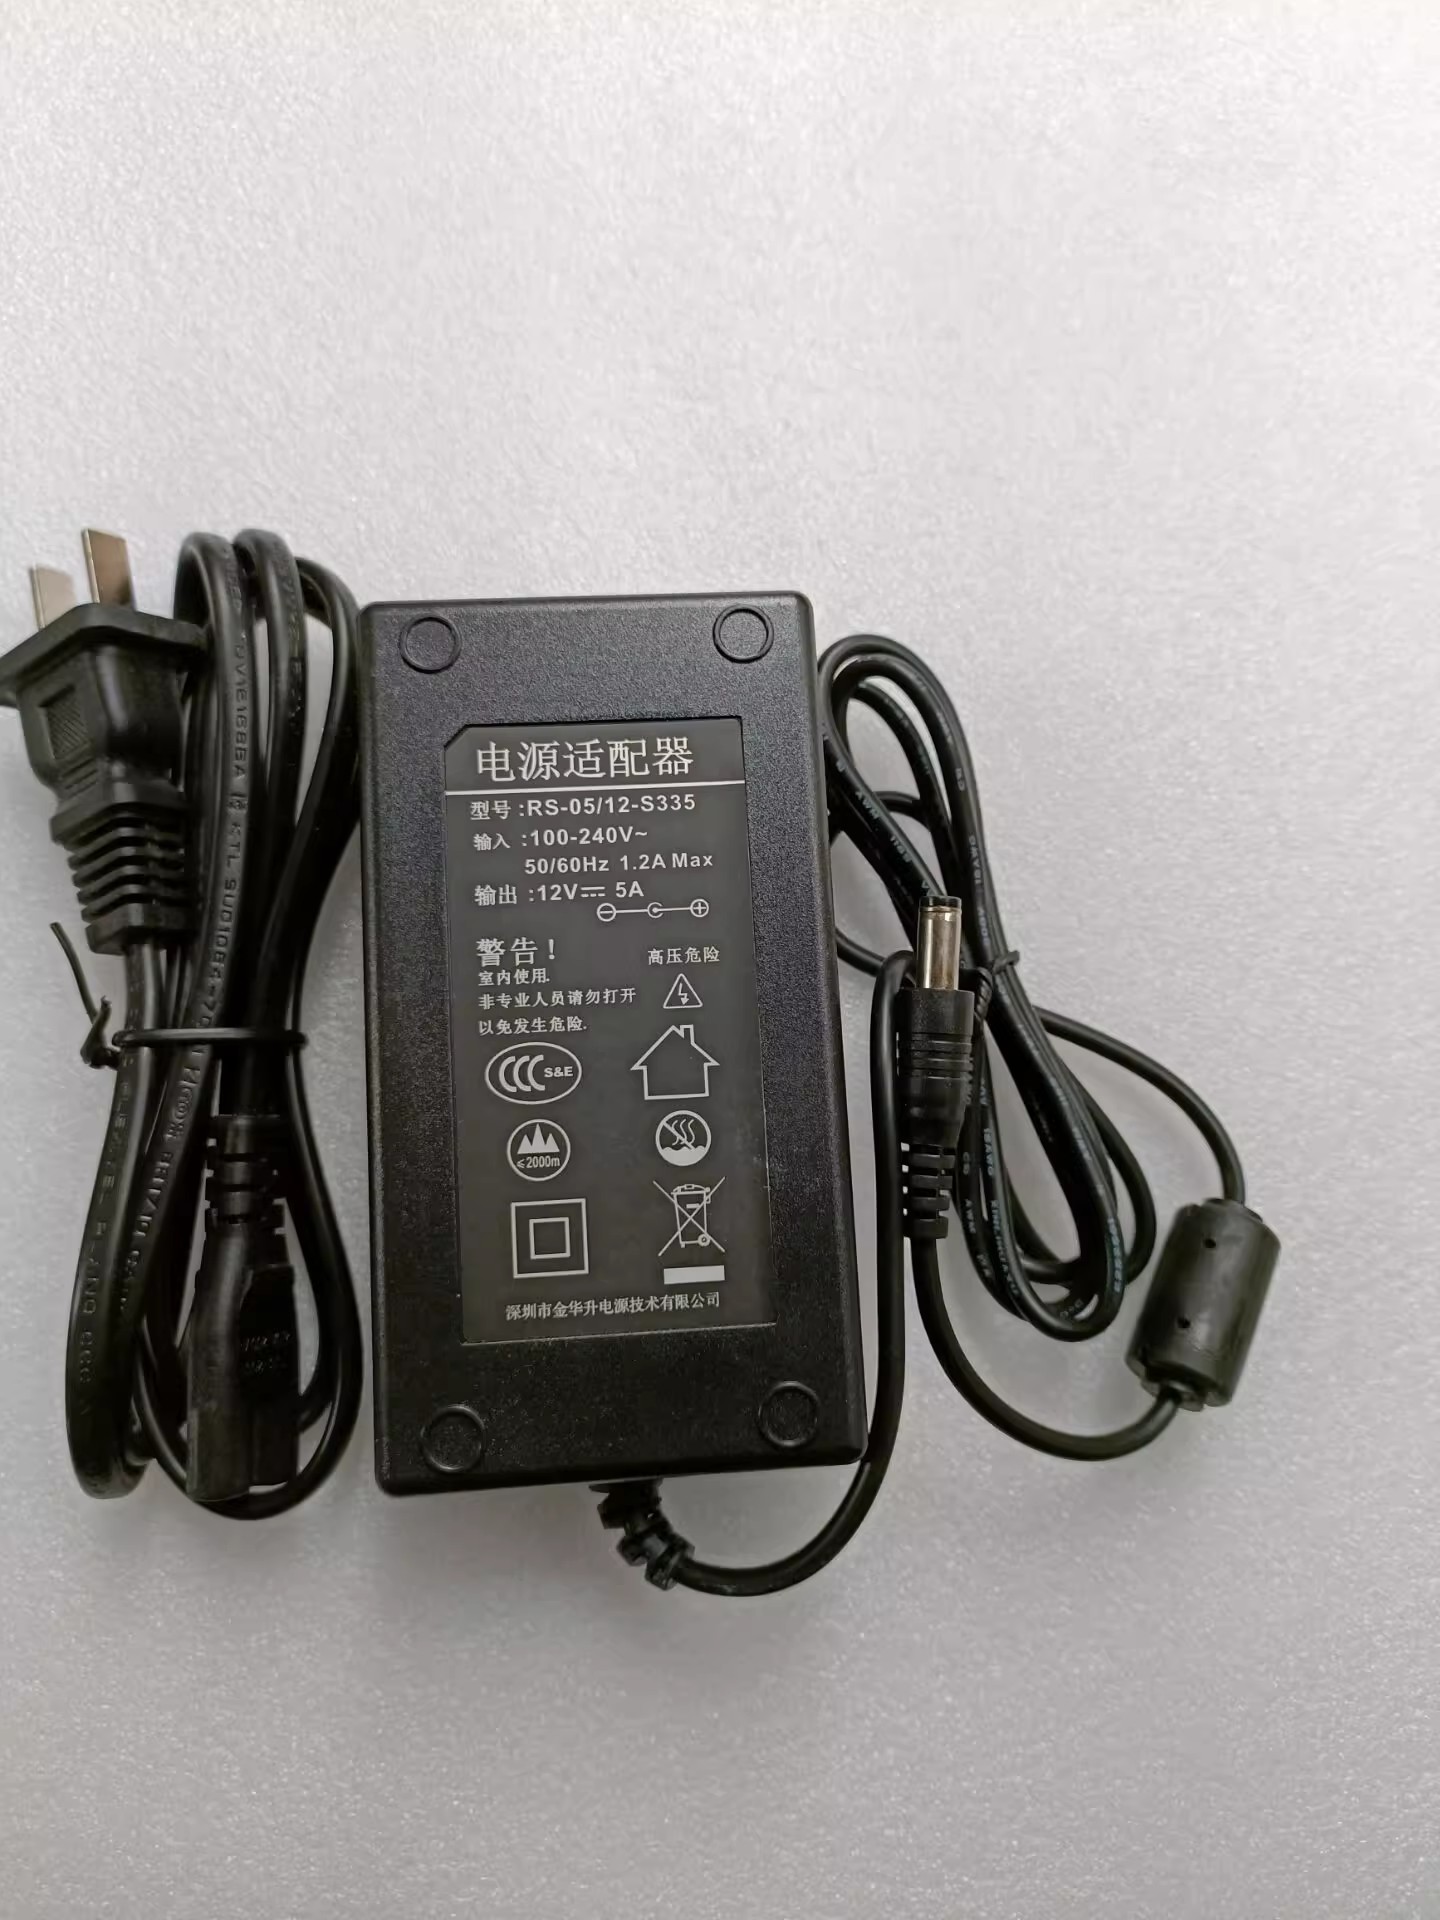 *Brand NEW*RS-05/12-S335 12V 5A AC DC ADAPTHE POWER Supply